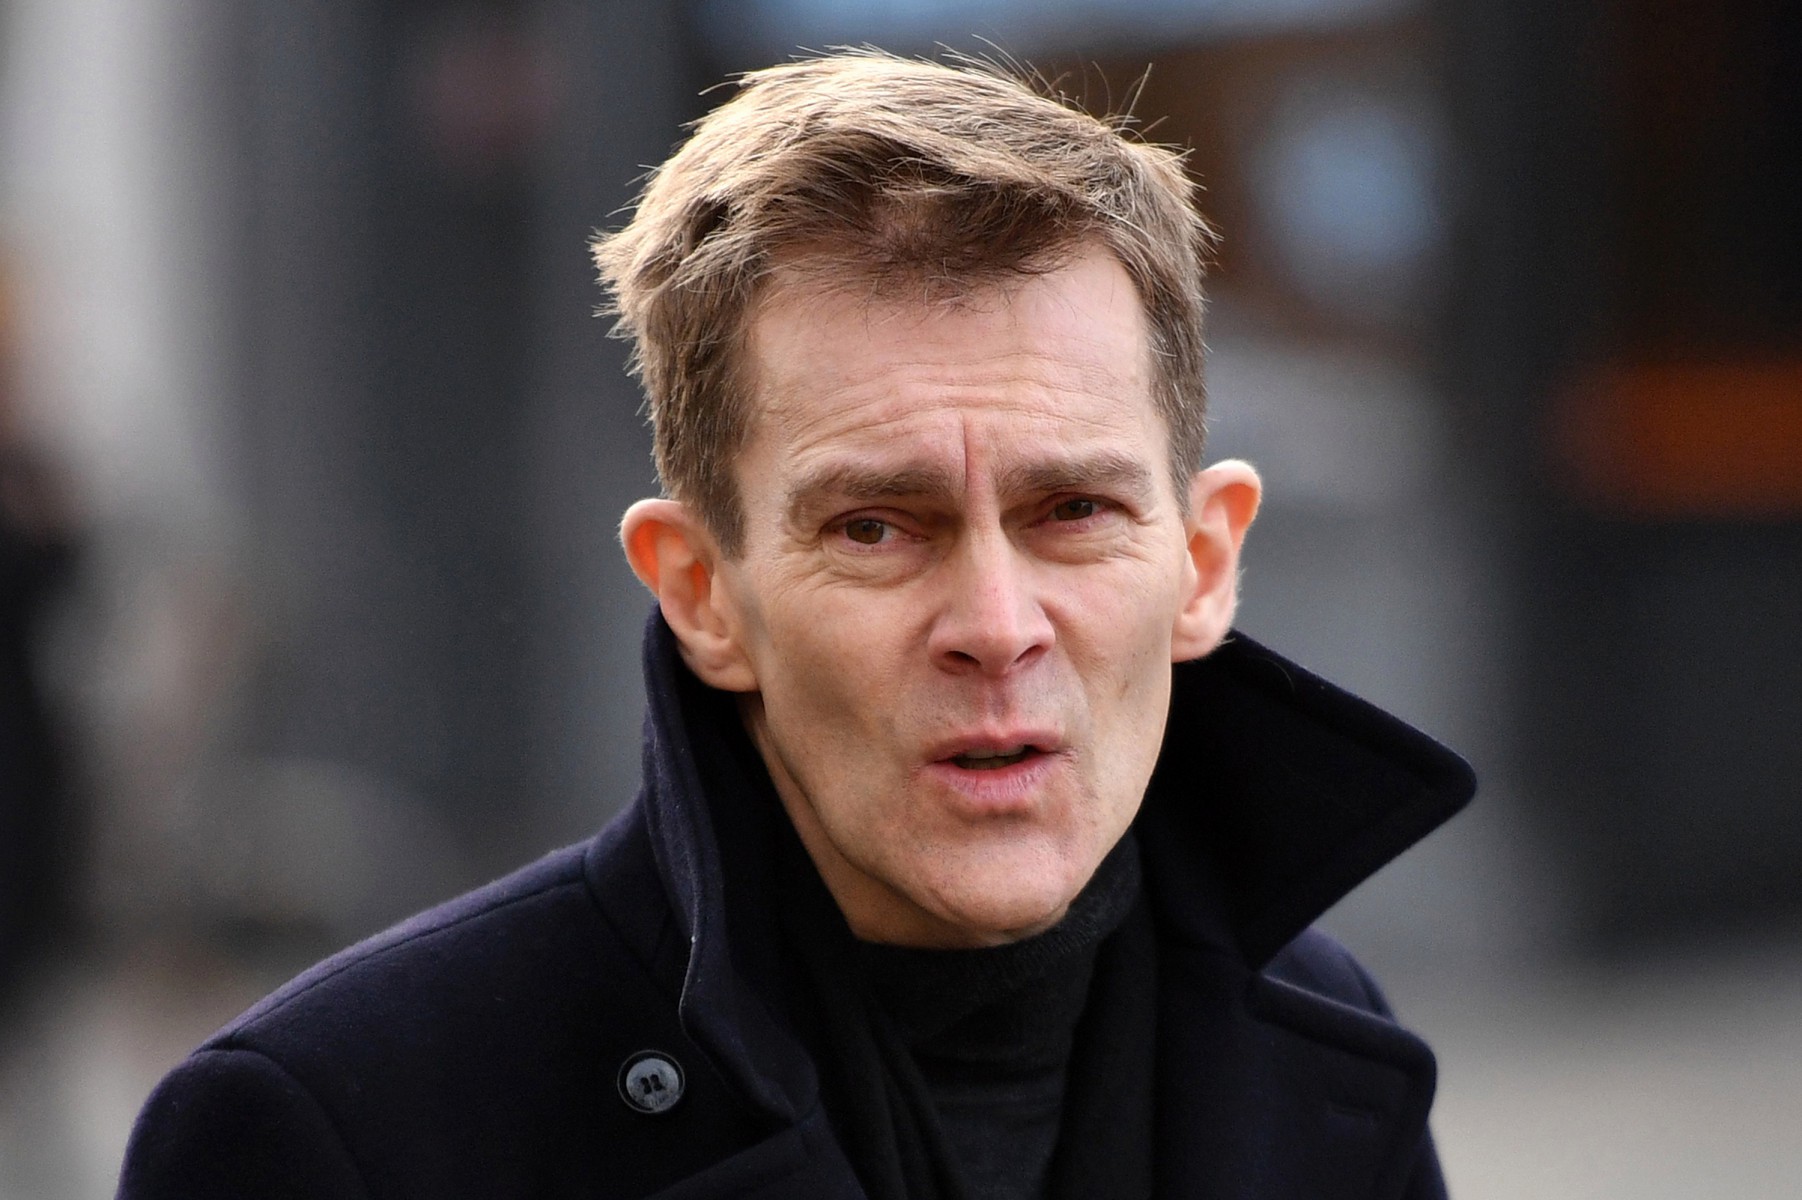 Labour MPs are expected to demand the sacking of Jeremy Corbyns aide Seumas Milne, blamed by many for the election debacle